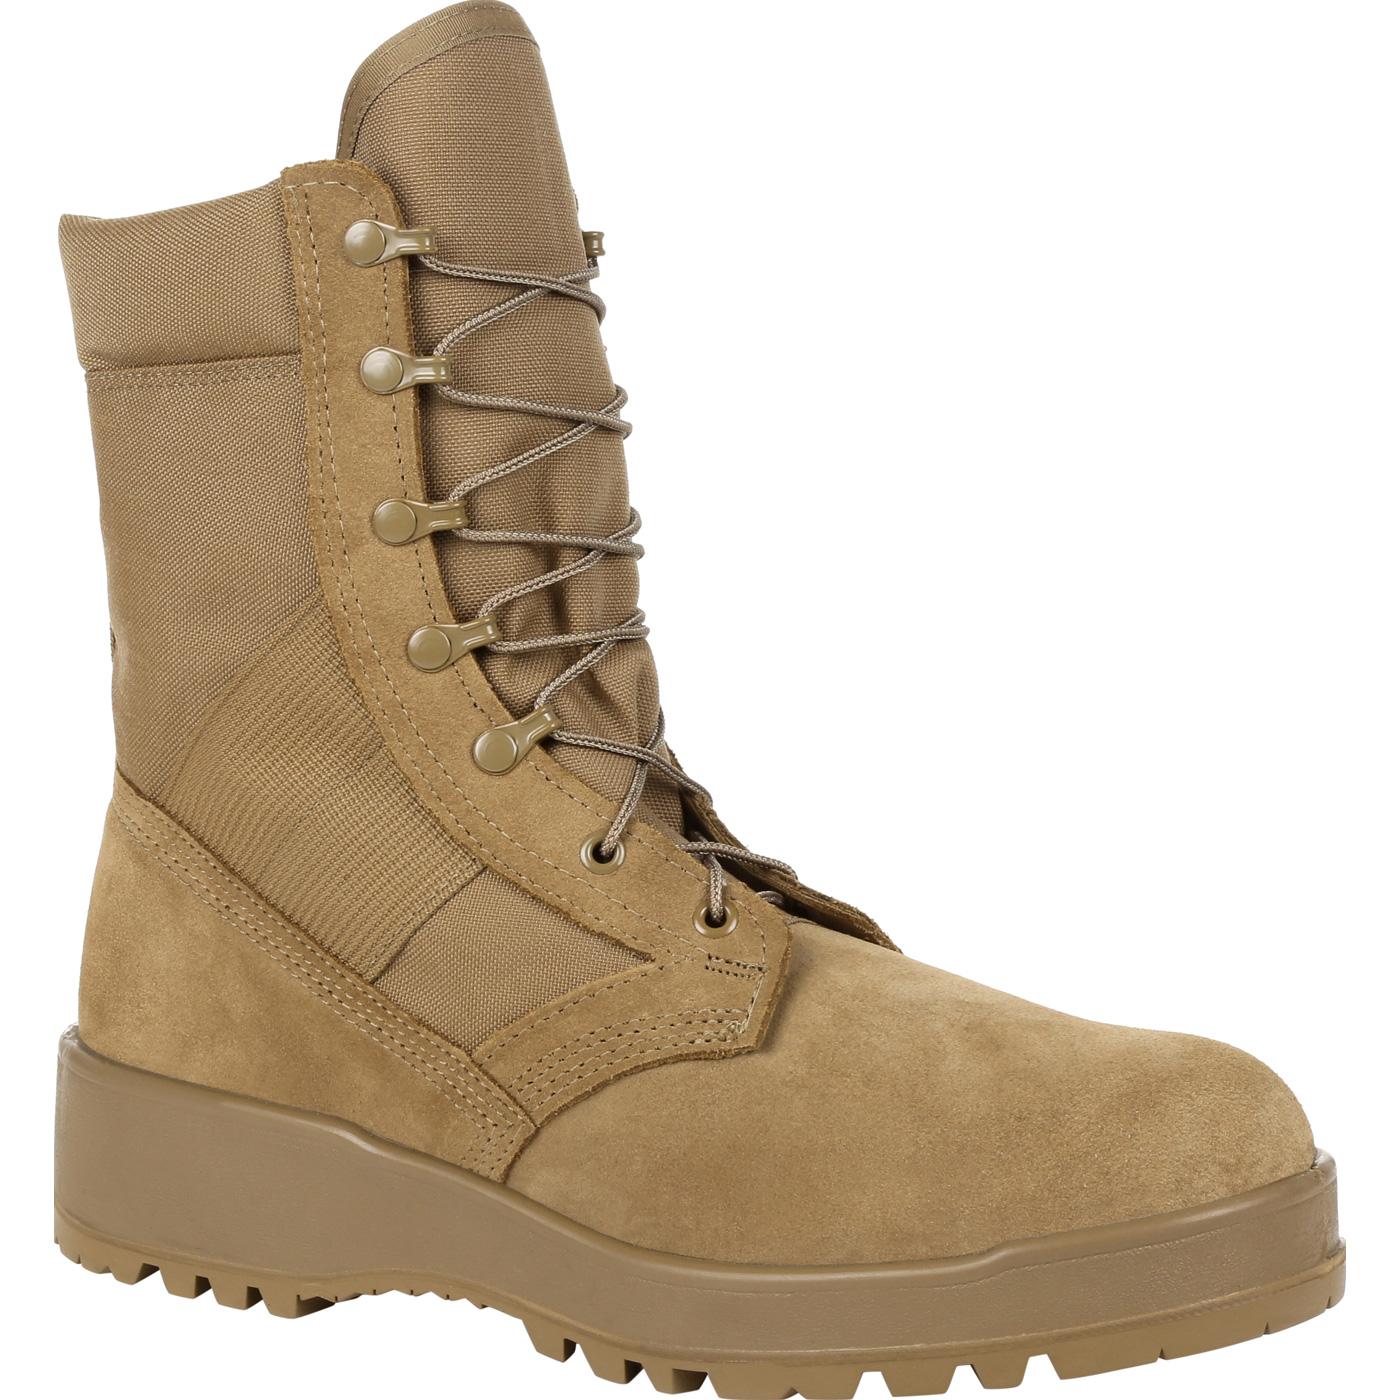 Ours Drive out remark military combat boots fry money transfer cease